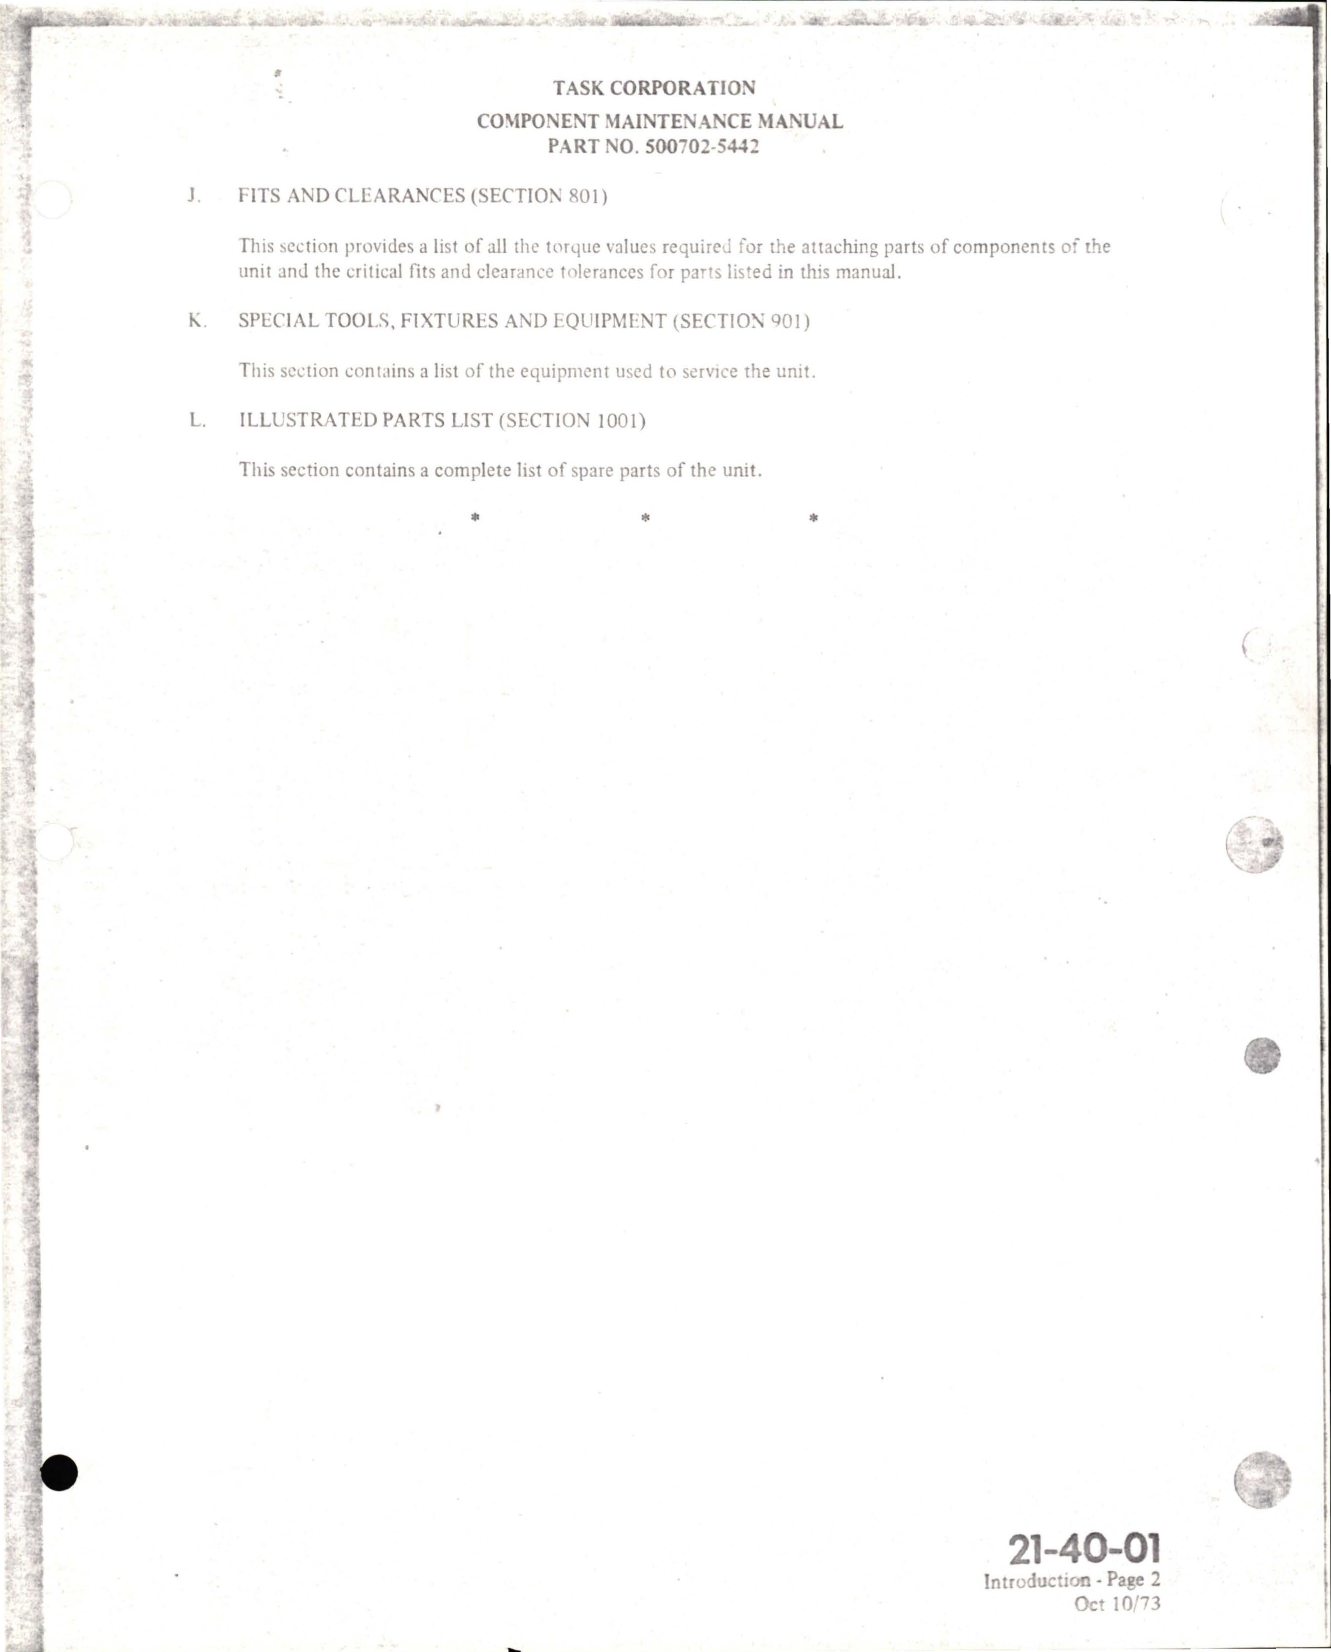 Sample page 9 from AirCorps Library document: Maintenance Manual with Illustrated Parts List for Axivane Fan - Part 500702-5442 